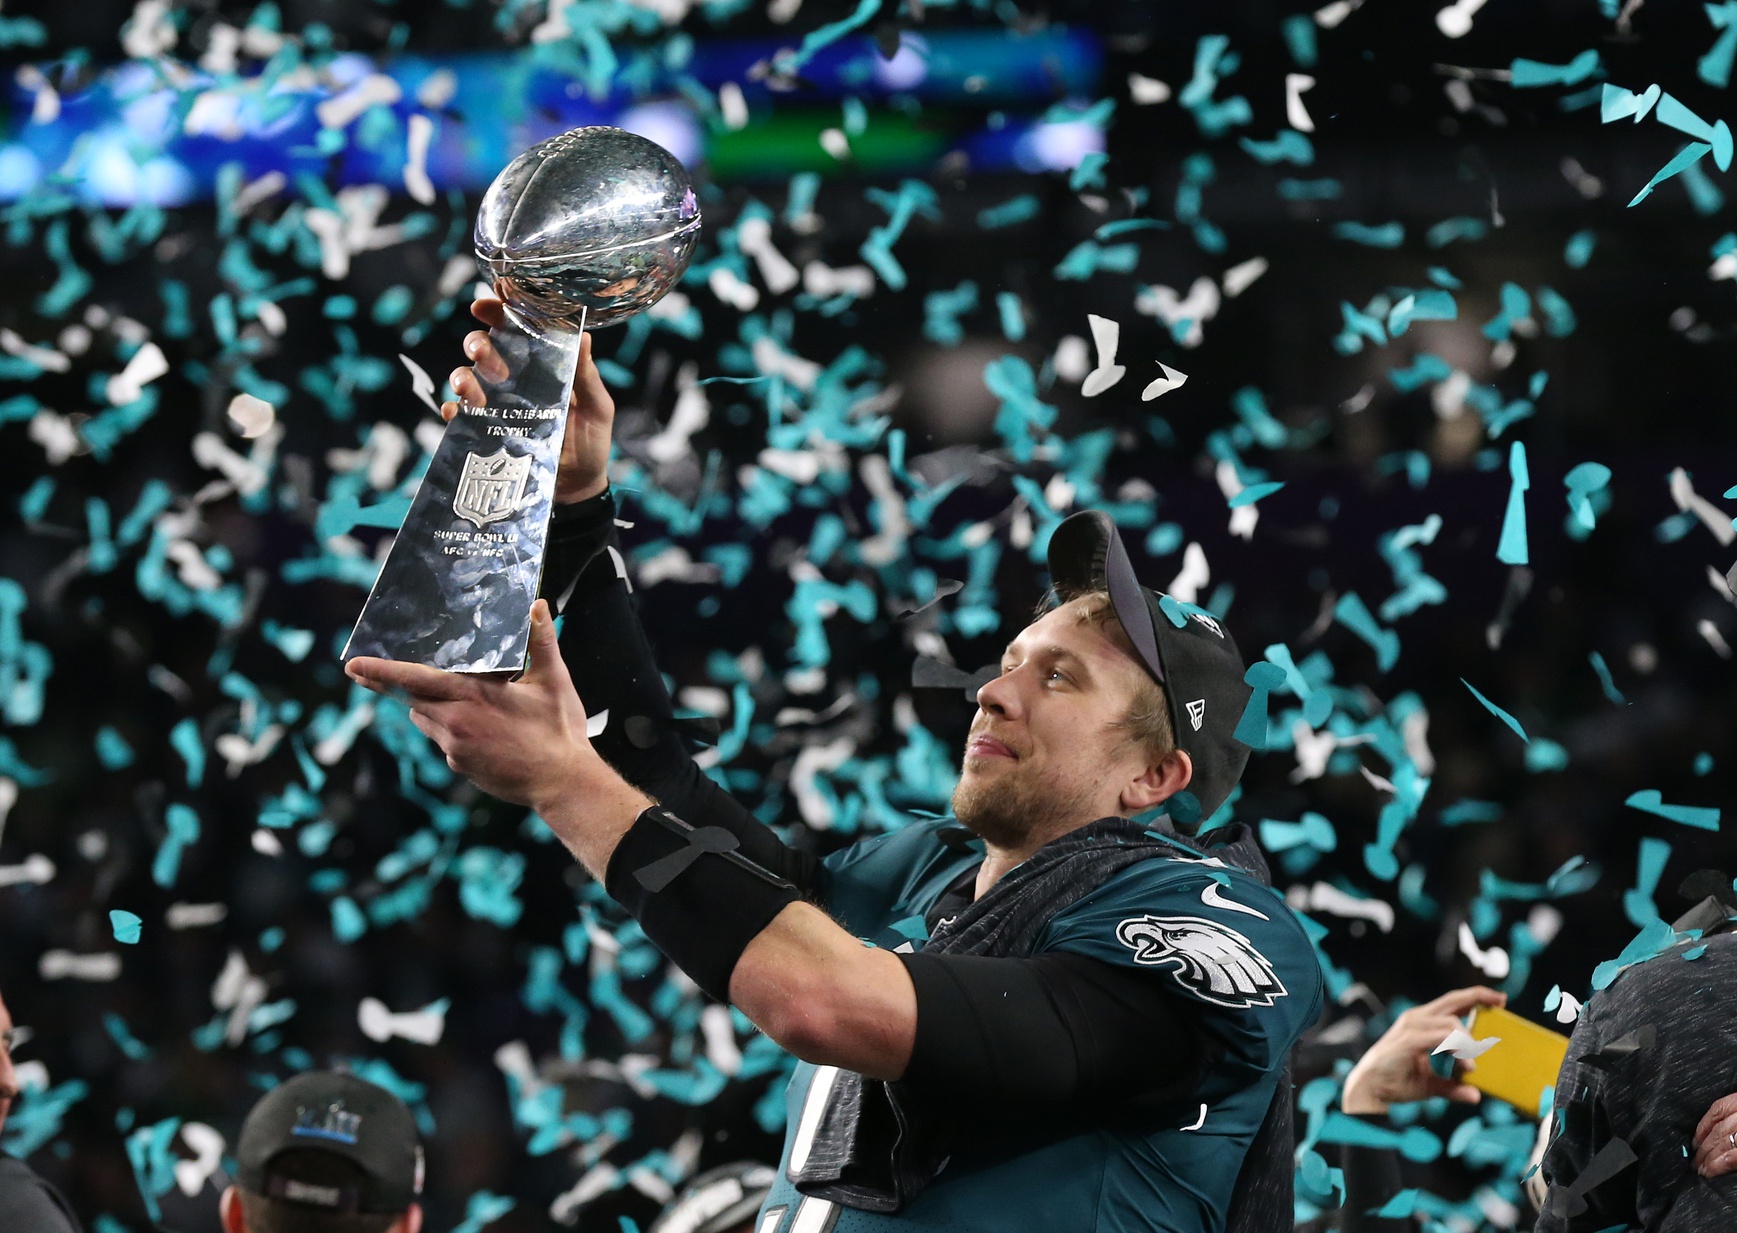 Apparently Nick Foles had an “Elbow Issue” During Super Bowl Run